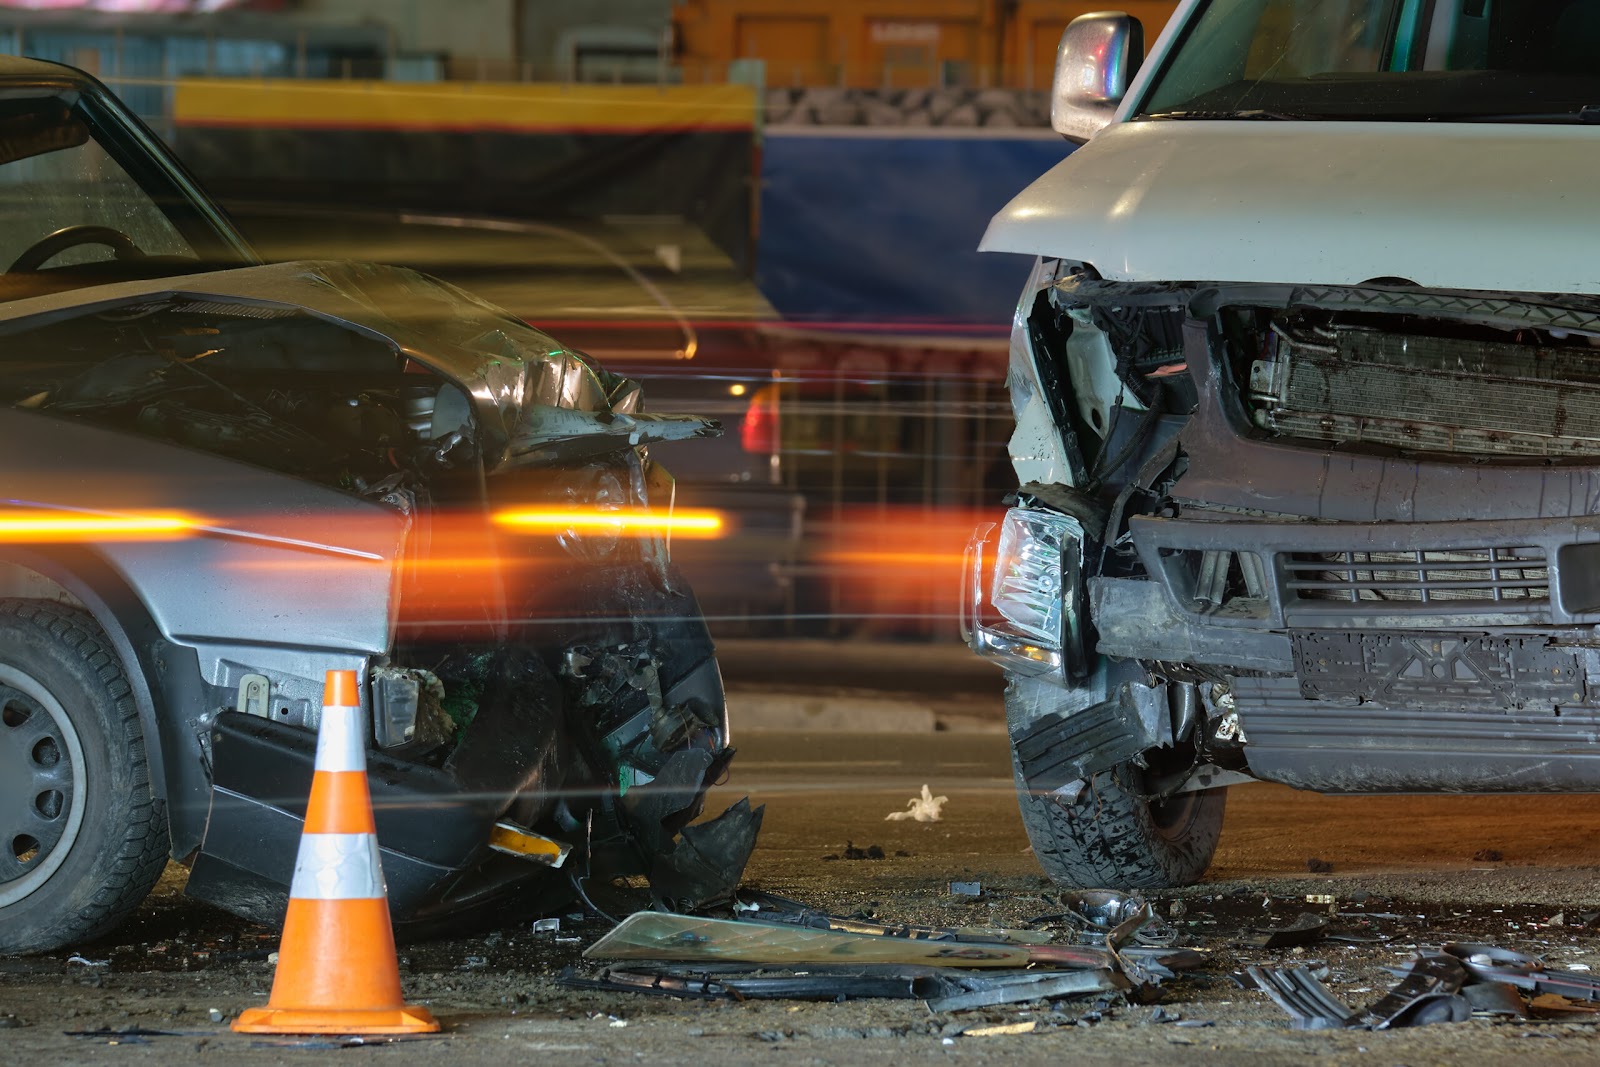 Damaged in heavy car accident vehicles after drunk driving collision on city street